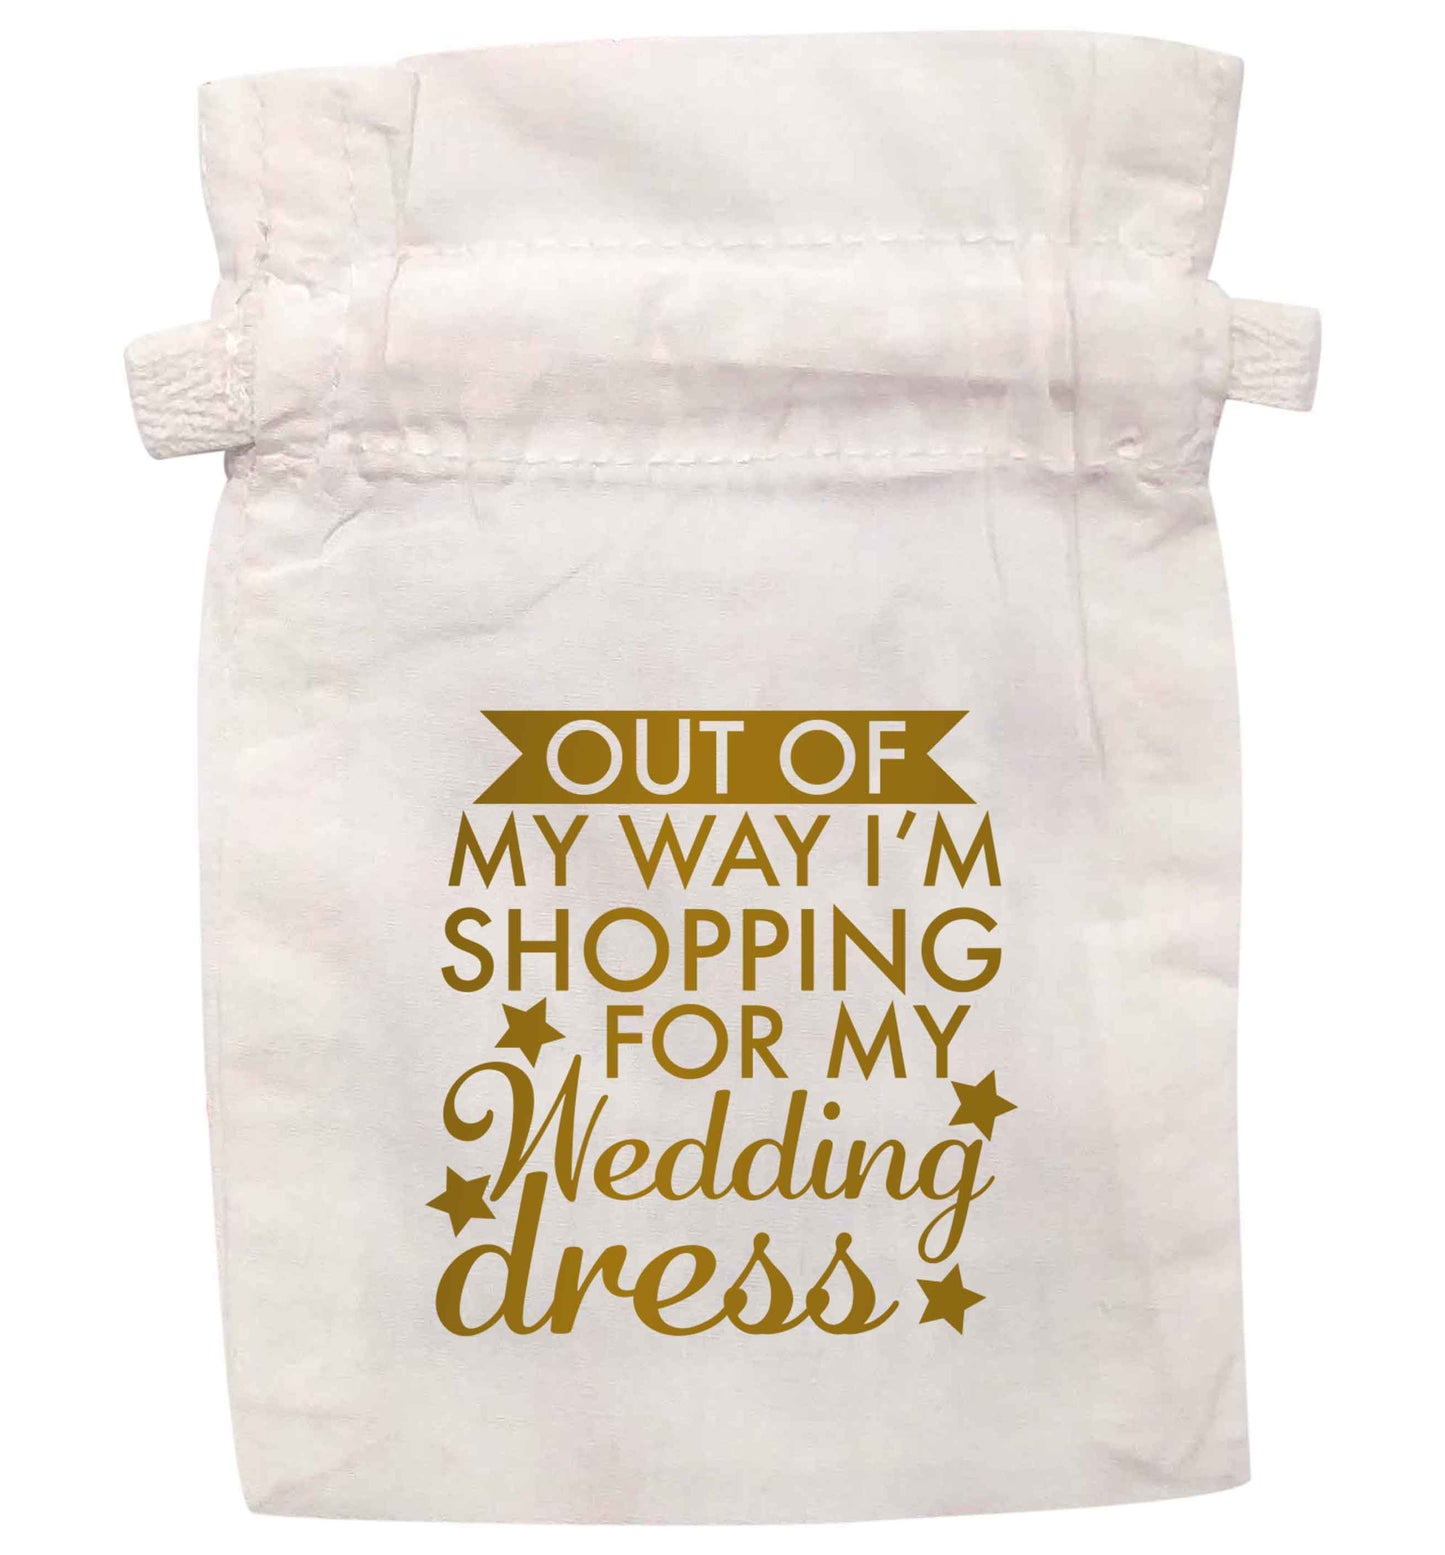 Out of my way I'm shopping for my wedding dress | XS - L | Pouch / Drawstring bag / Sack | Organic Cotton | Bulk discounts available!